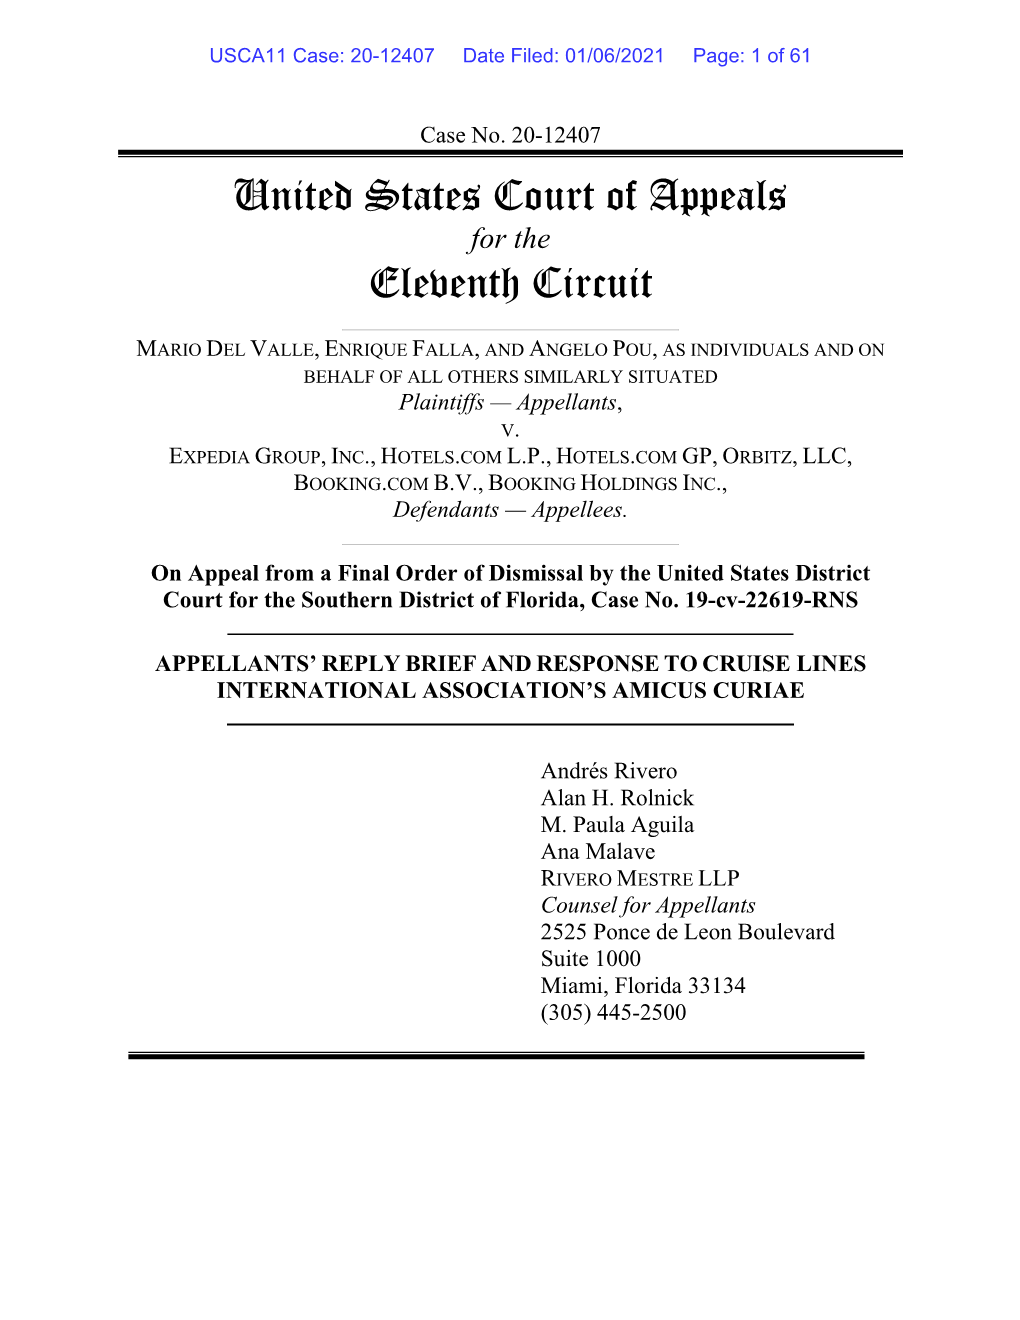 United States Court of Appeals Eleventh Circuit